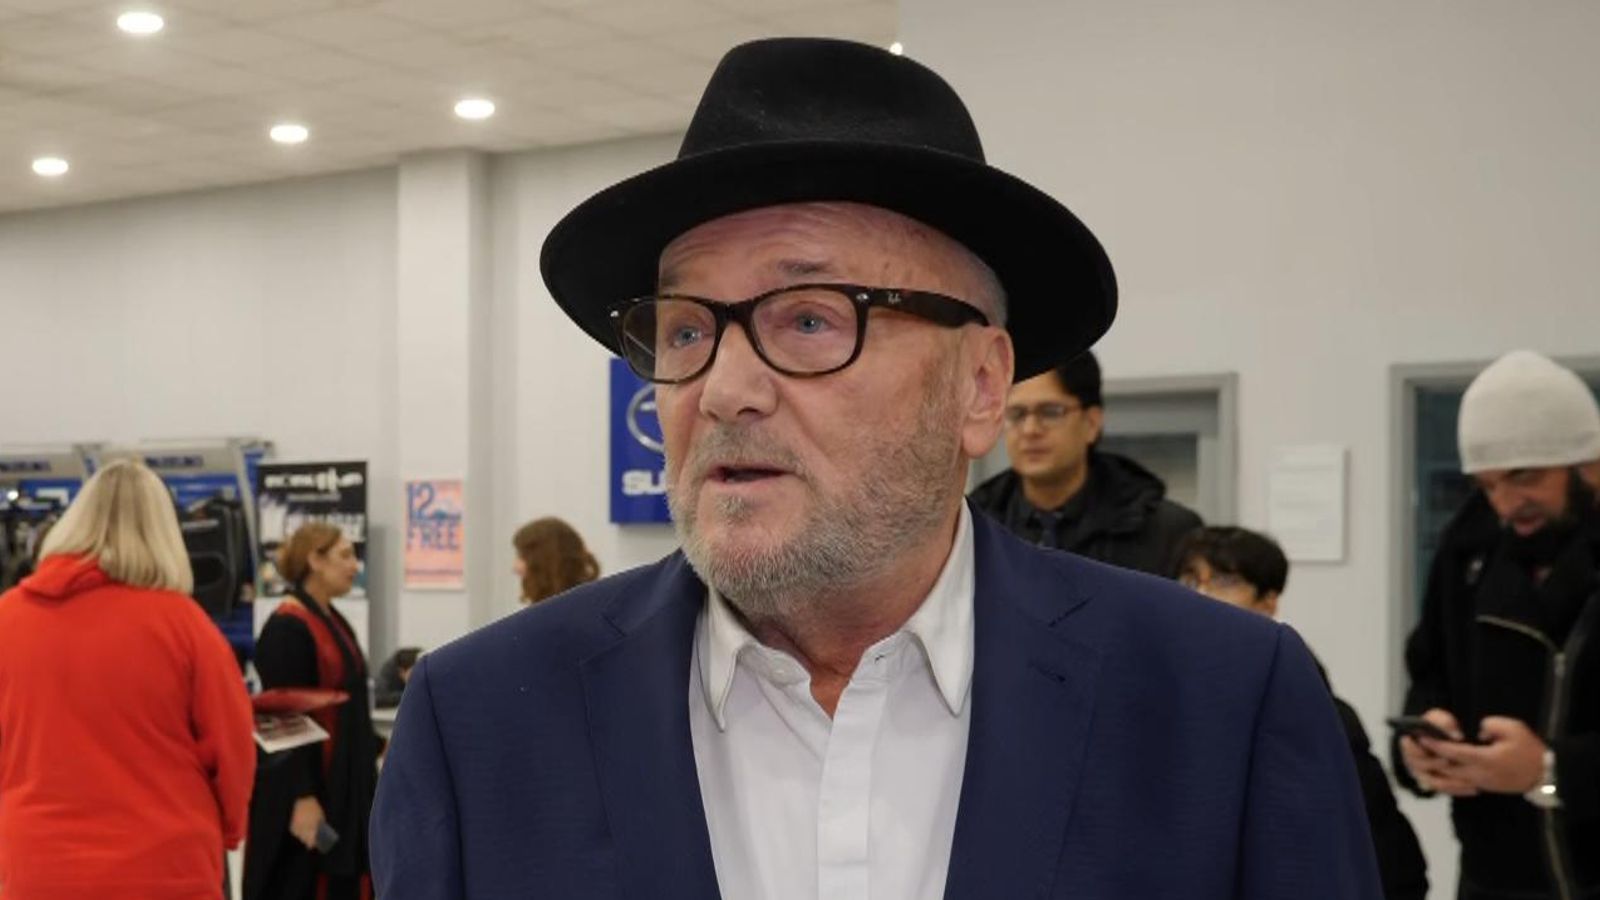 'I despise the PM': George Galloway hits back at 'little' Rishi Sunak after Rochdale win called 'alarming'